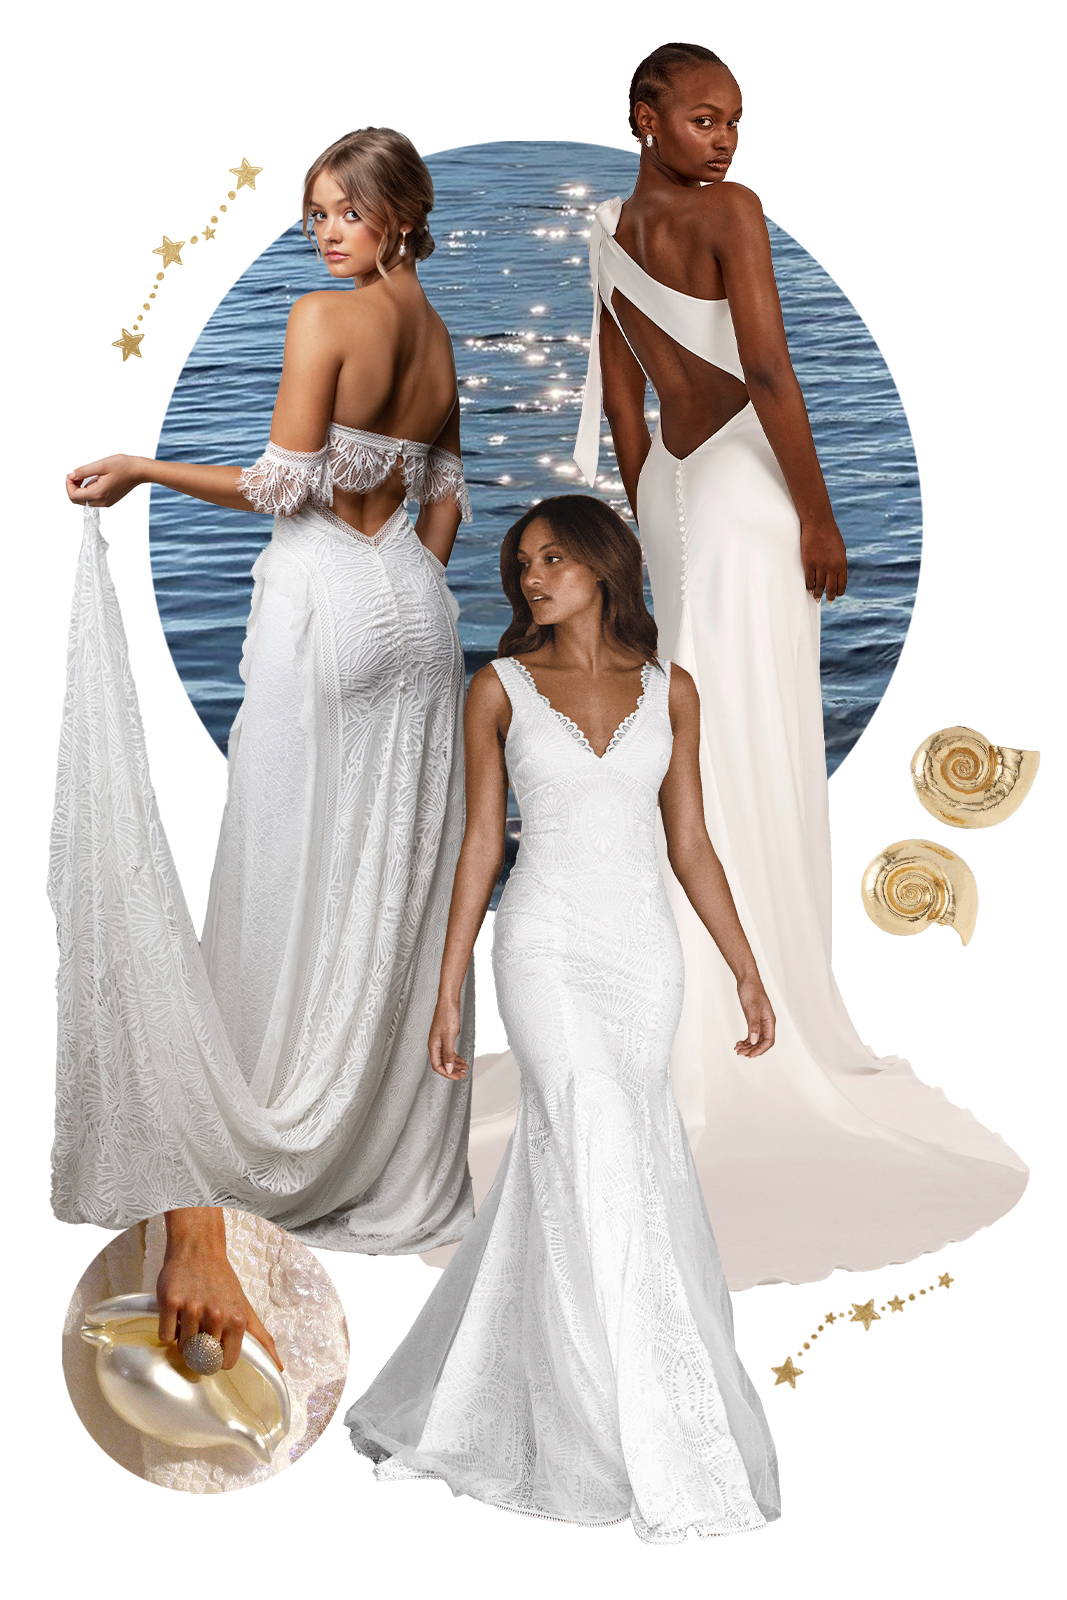 Water inspired collage featuring satin and lace wedding dresses